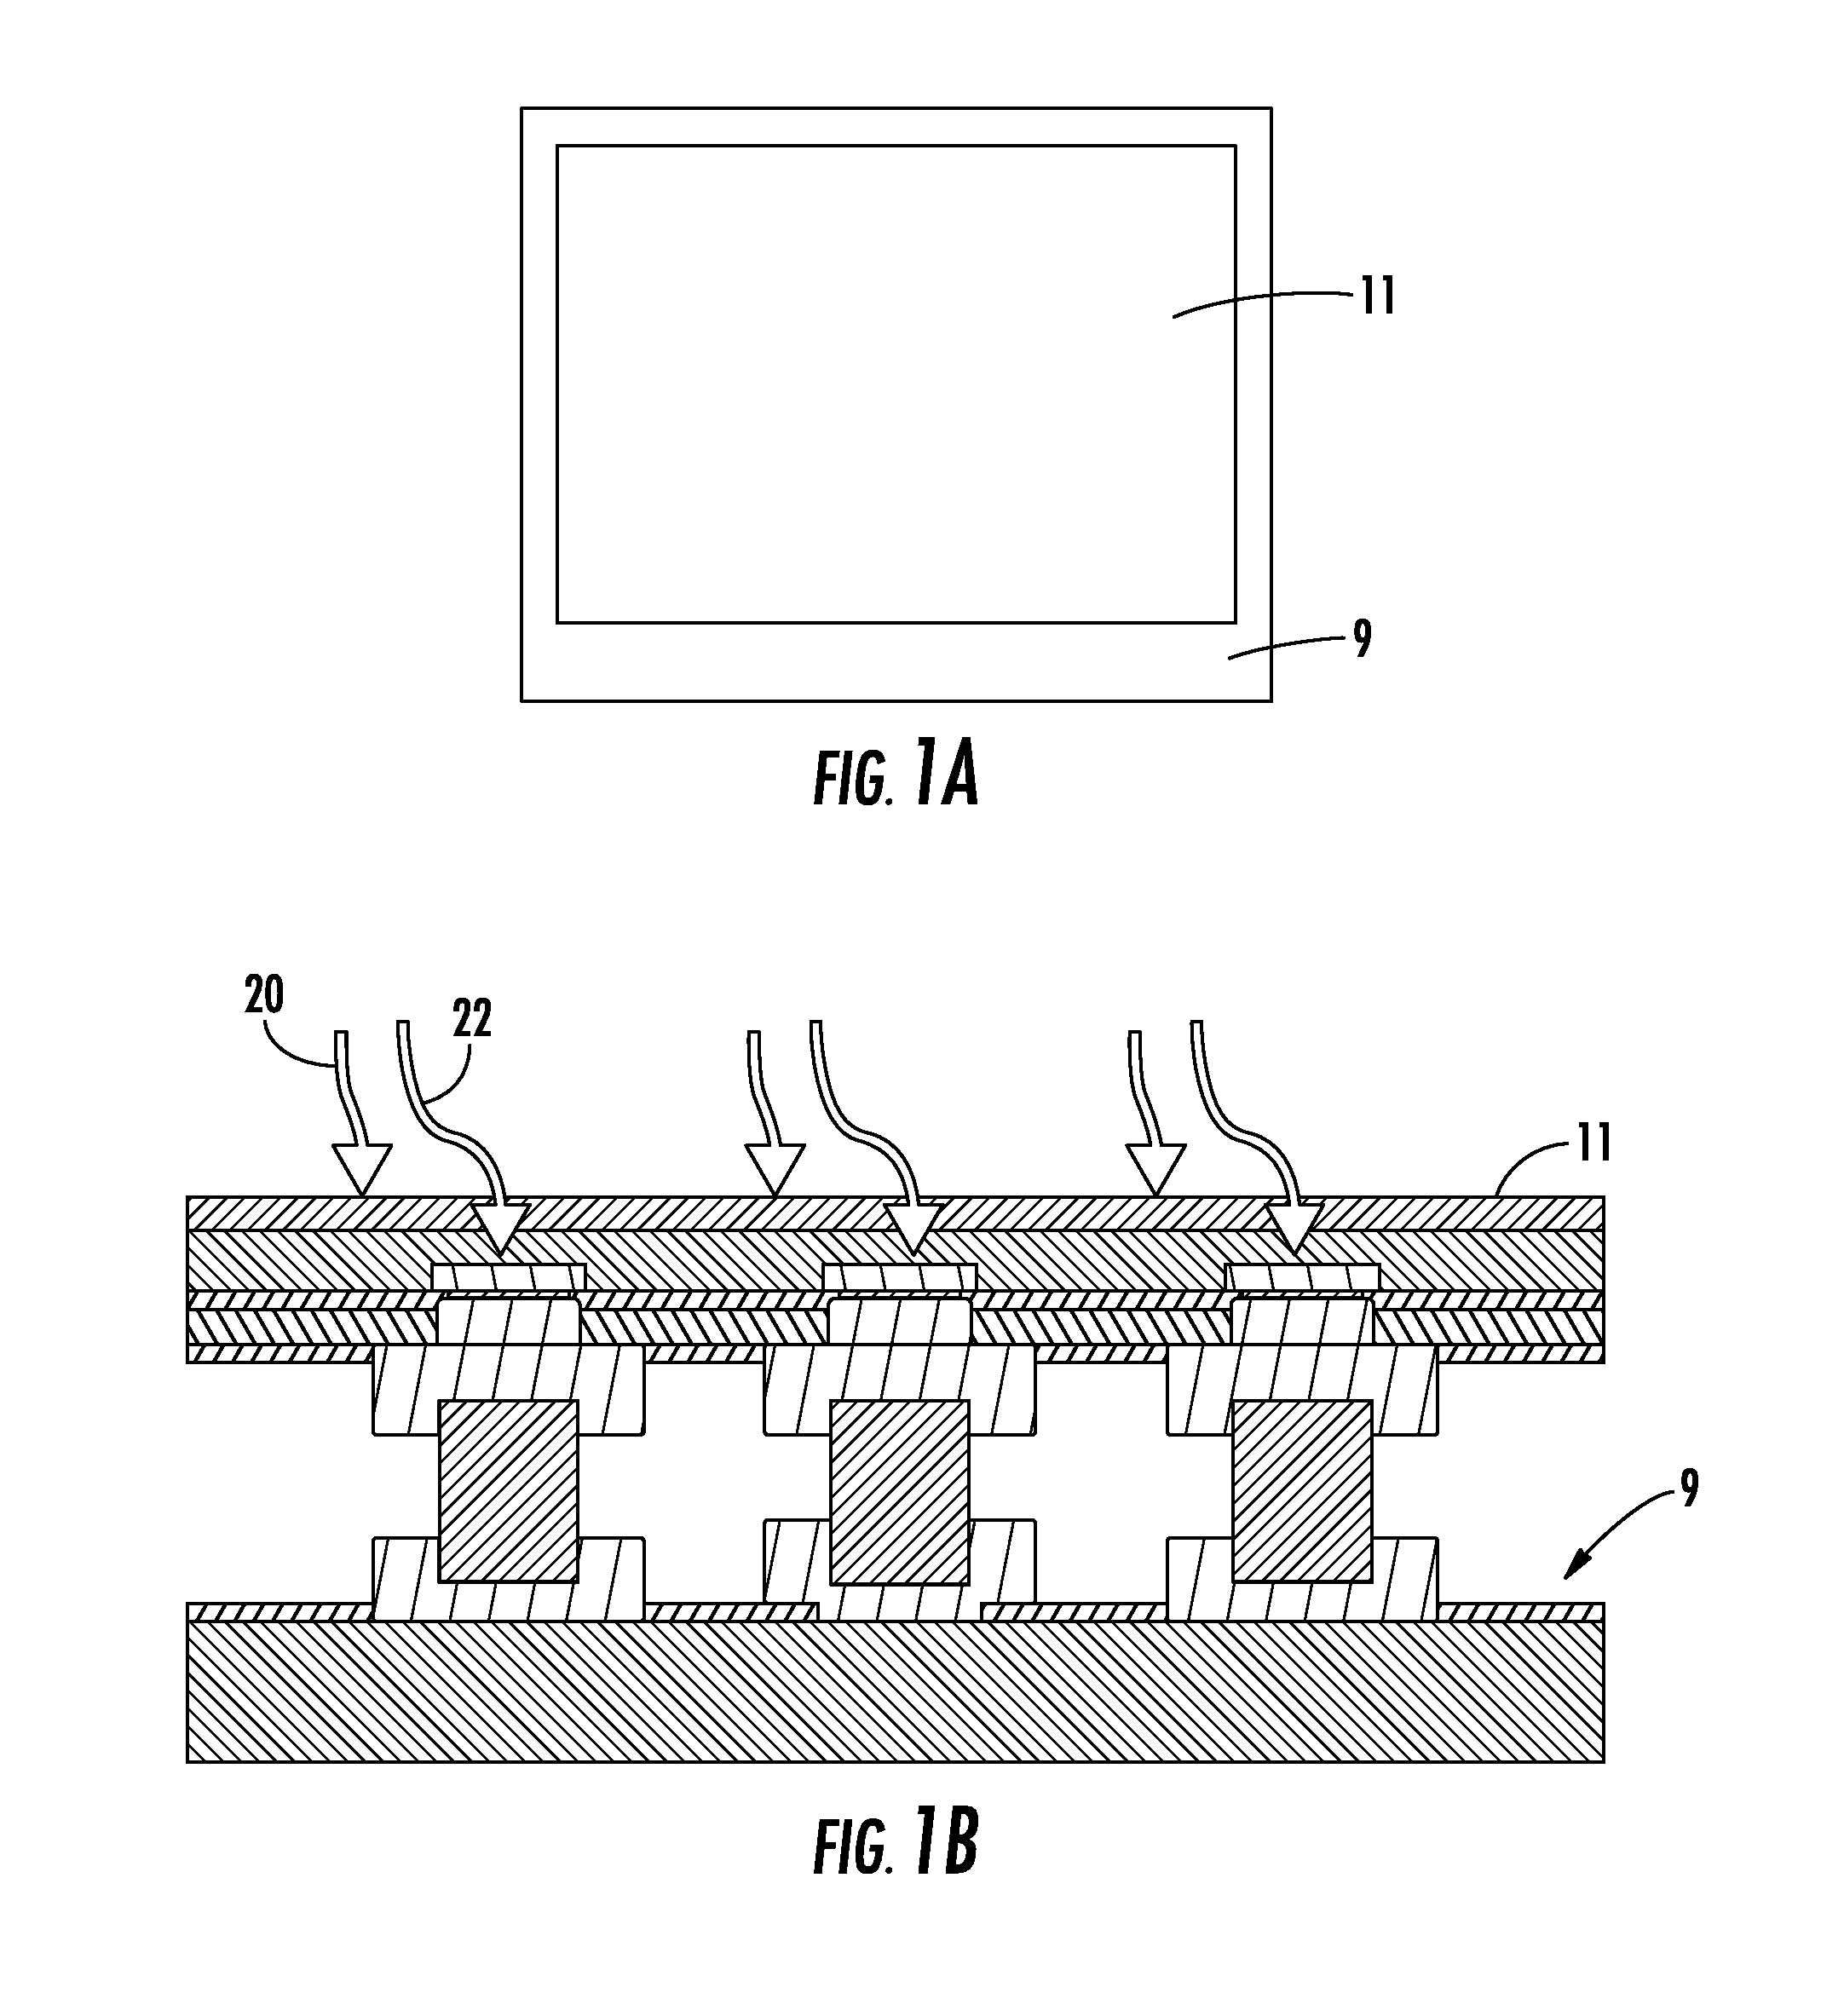 Perforated blocking layer for enhanced broad band response in a focal plane array